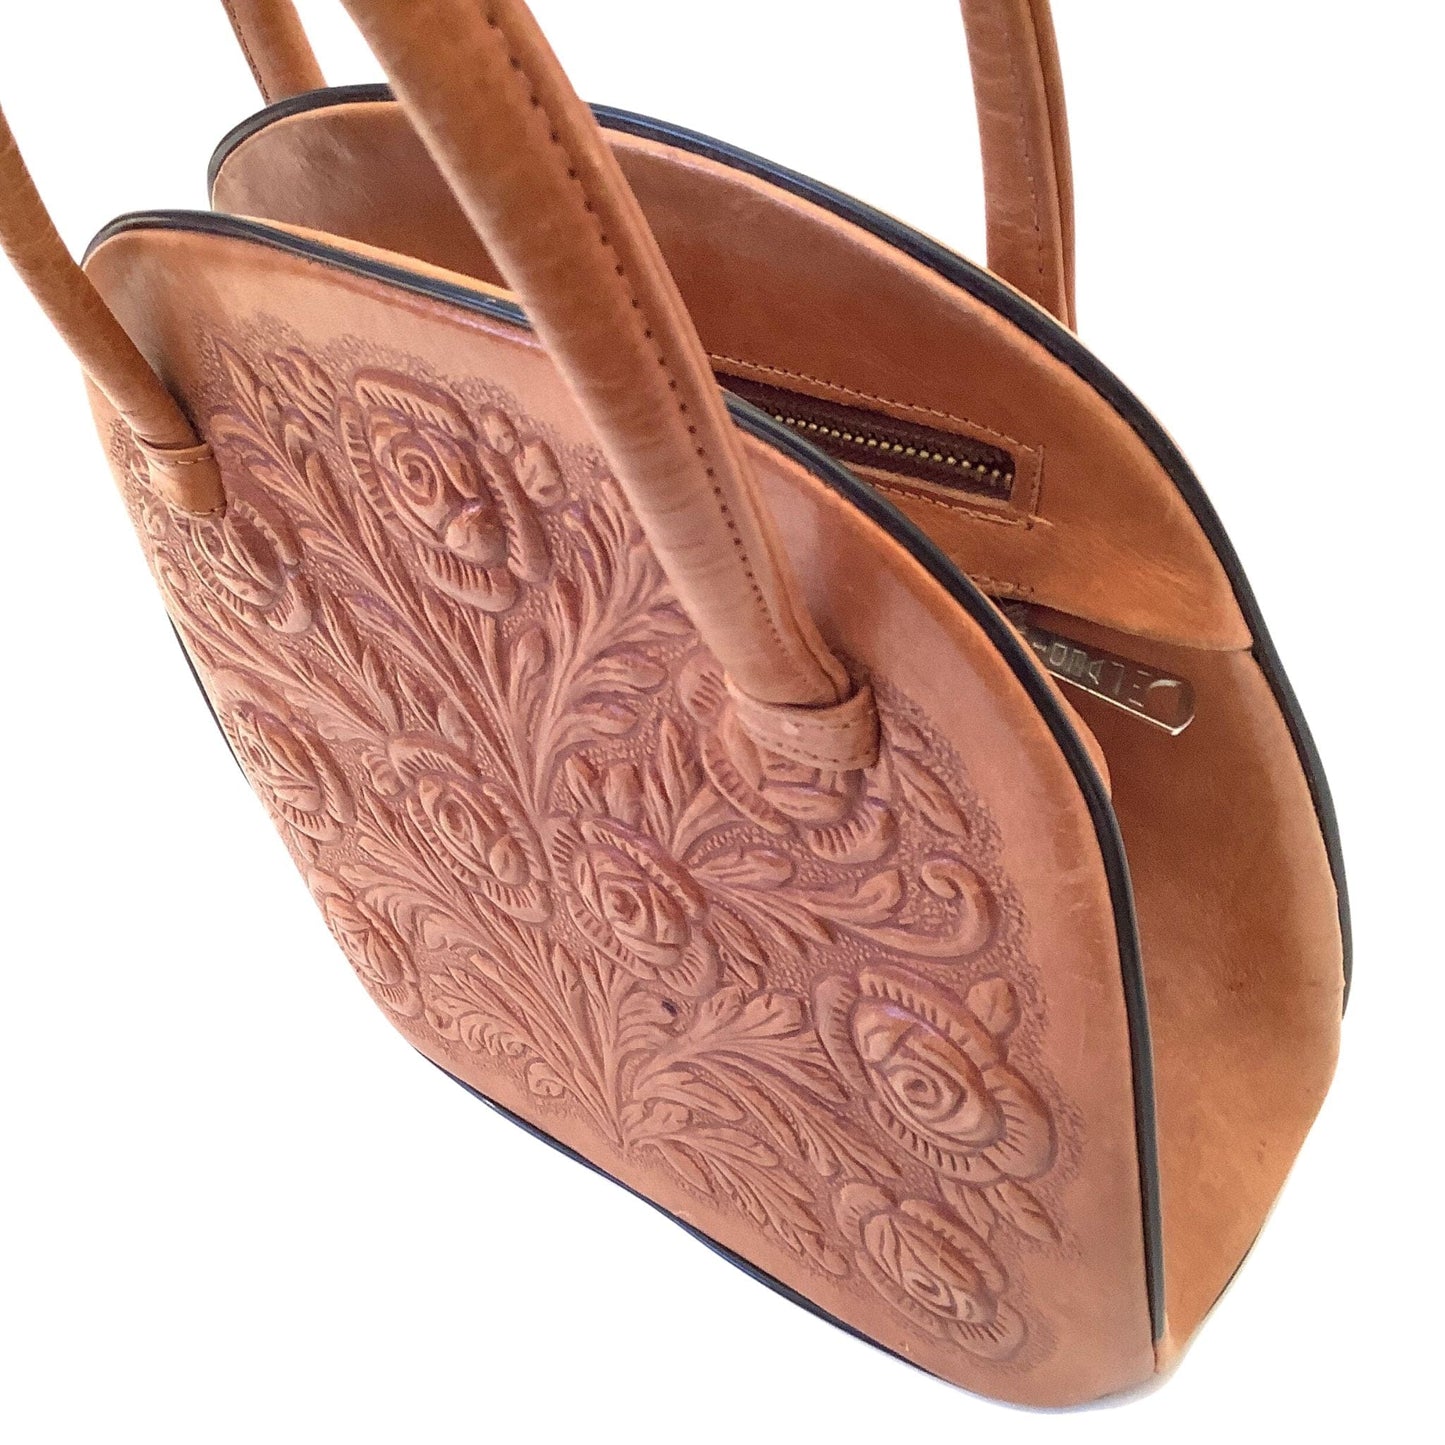 Tooled Leather Floral Purse Tan / Leather / Vintage 1960s